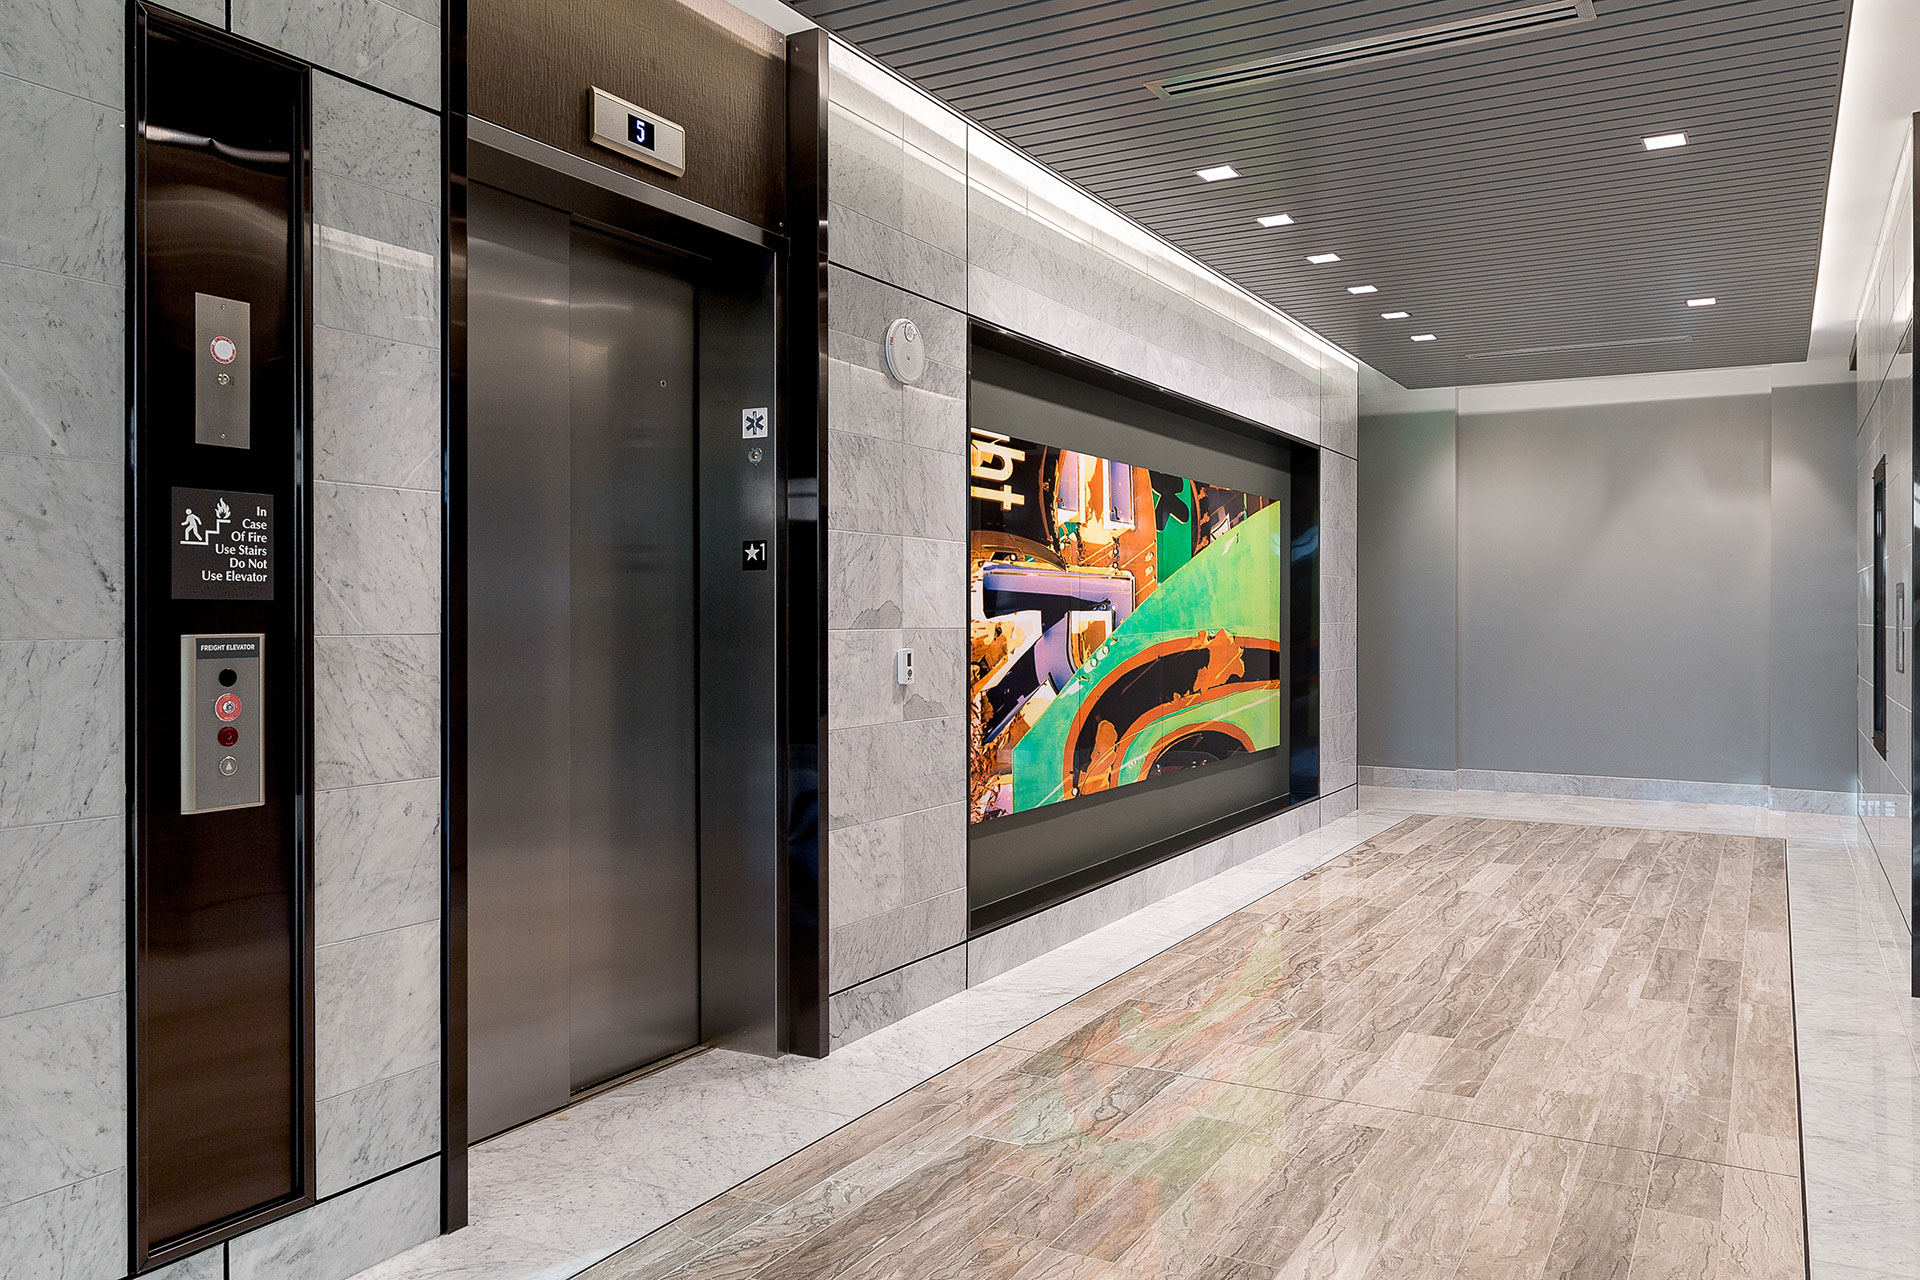 An office building elevator lobby with shiny tile floors and walls and a green, orange, black, and purple piece of abstract art hanging alongside a stainless steel elevator door.